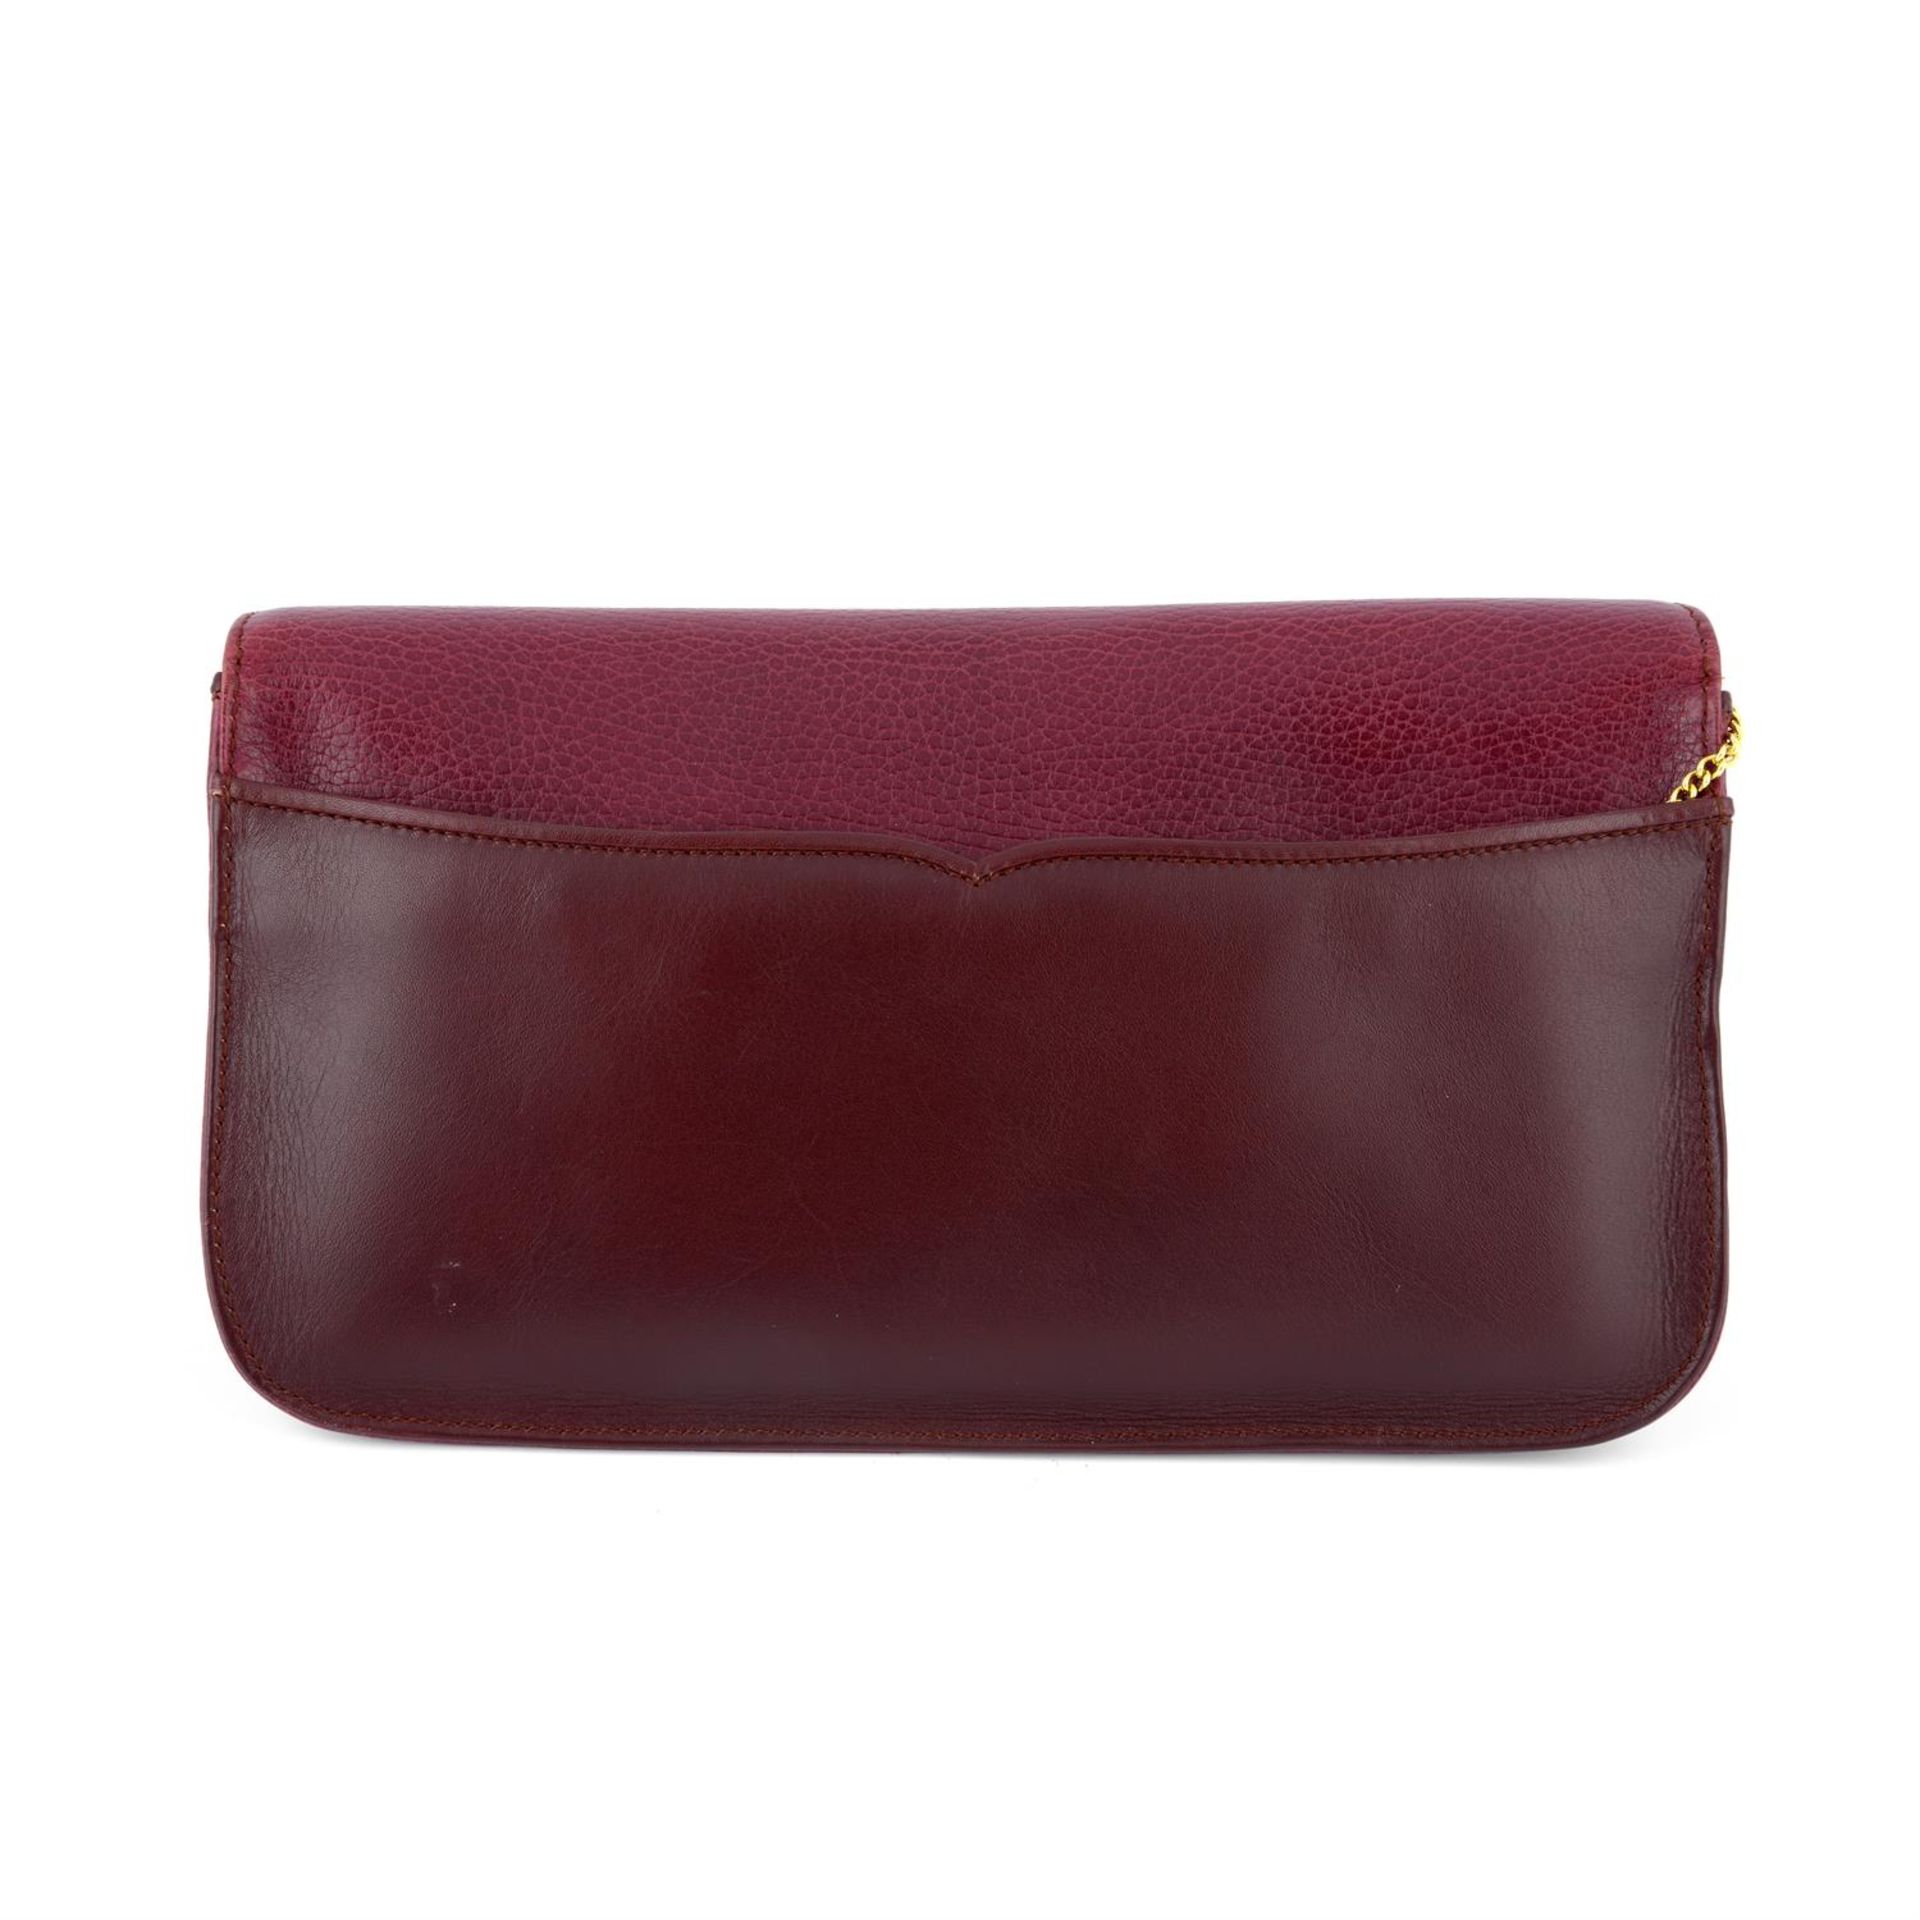 CARTIER - a 1989 red leather clutch. - Image 2 of 4